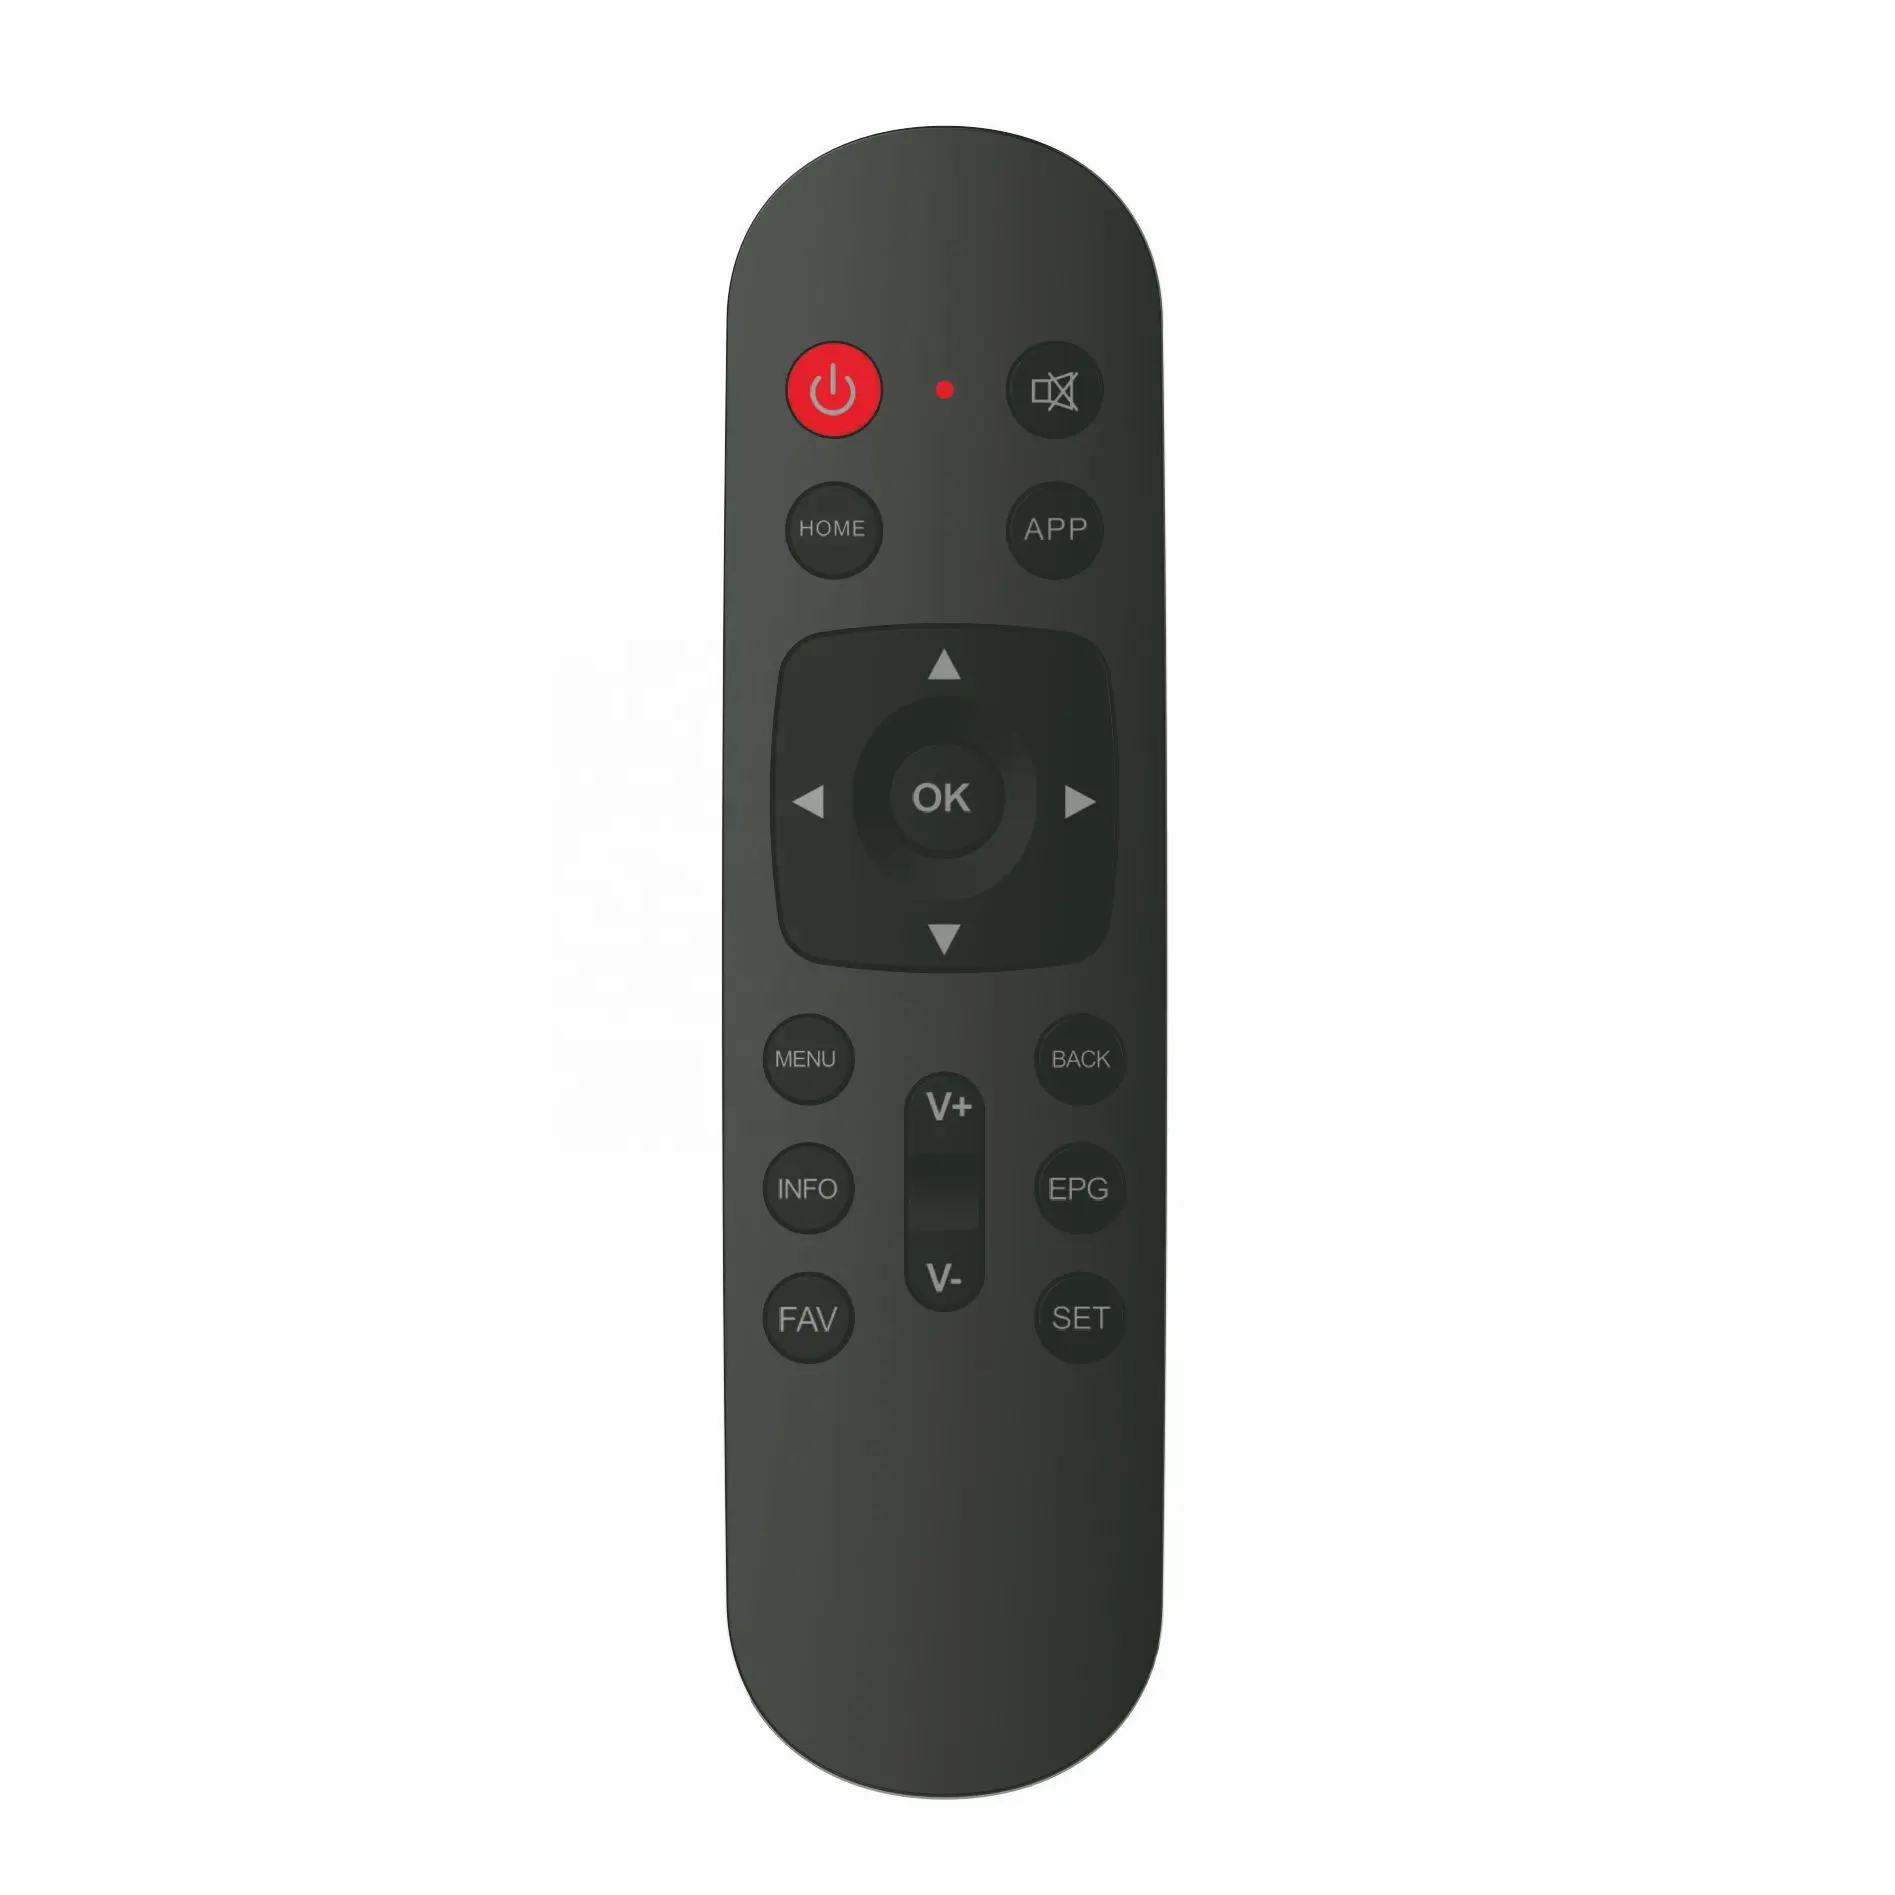 High end universal remote